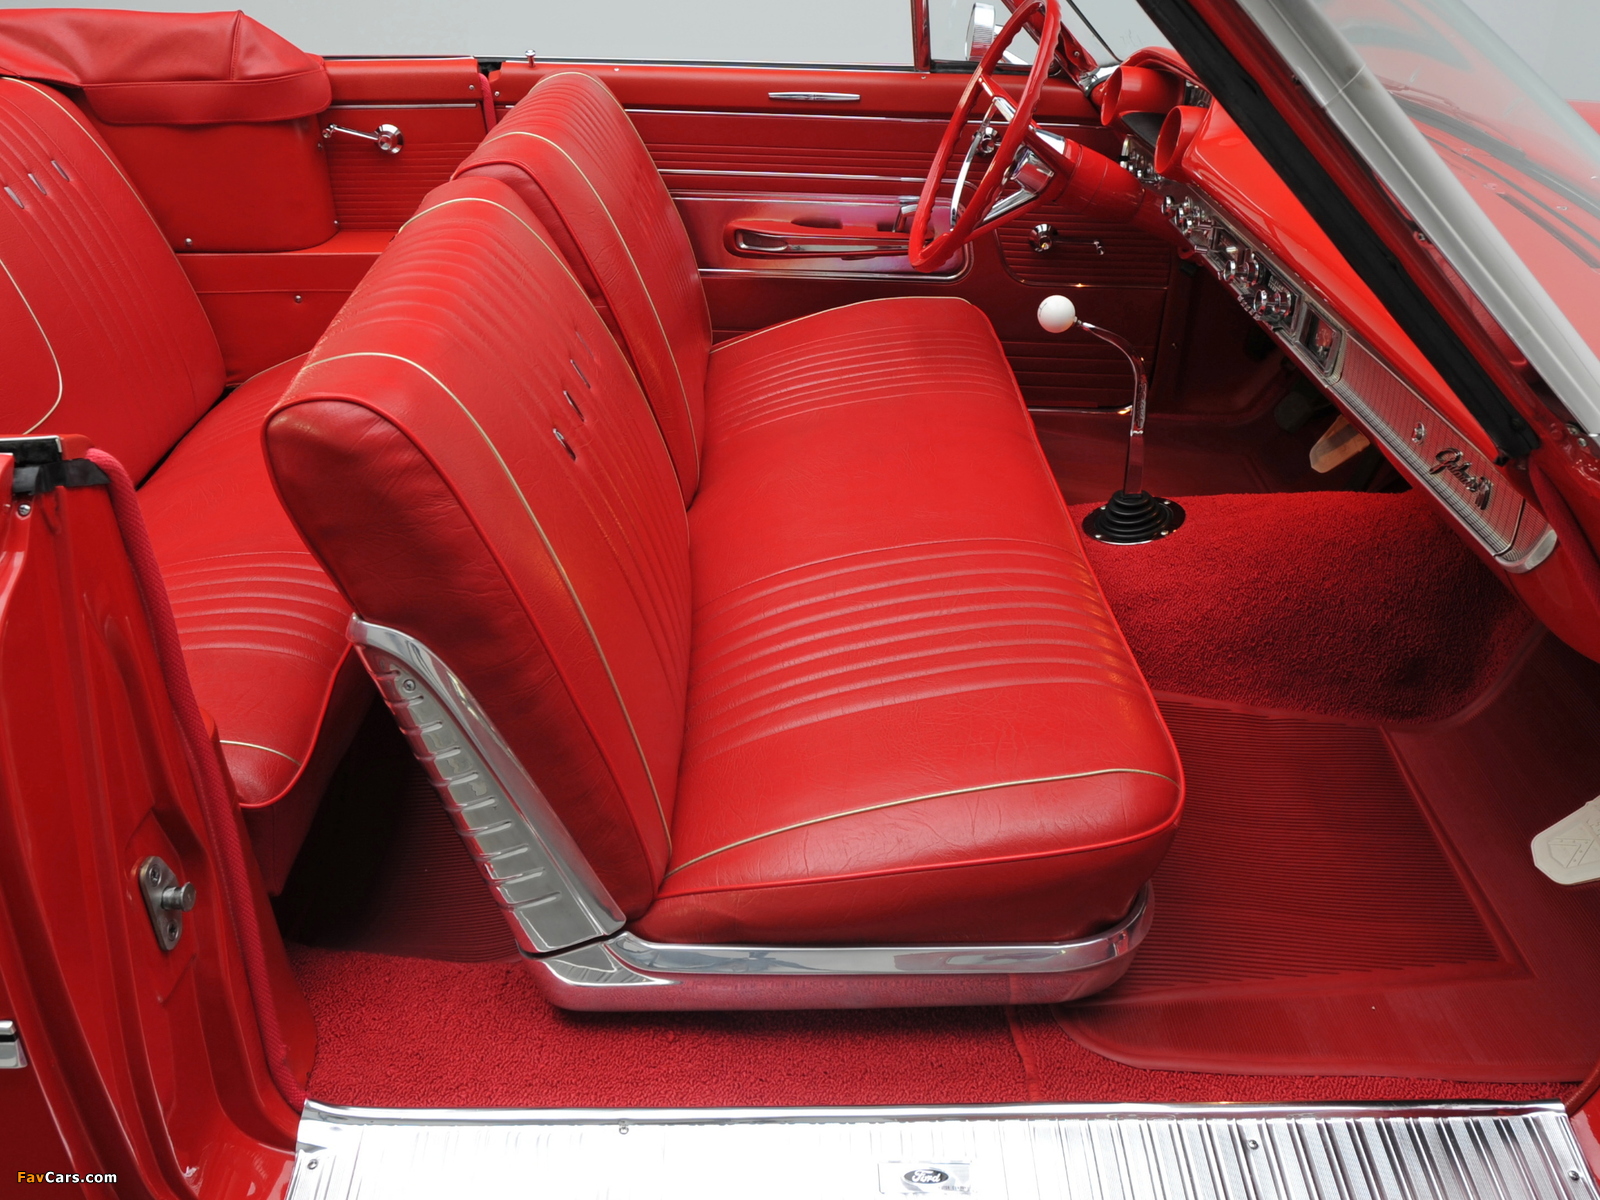 Photos of Ford Galaxie 500 Sunliner (65) 1963 (1600 x 1200)